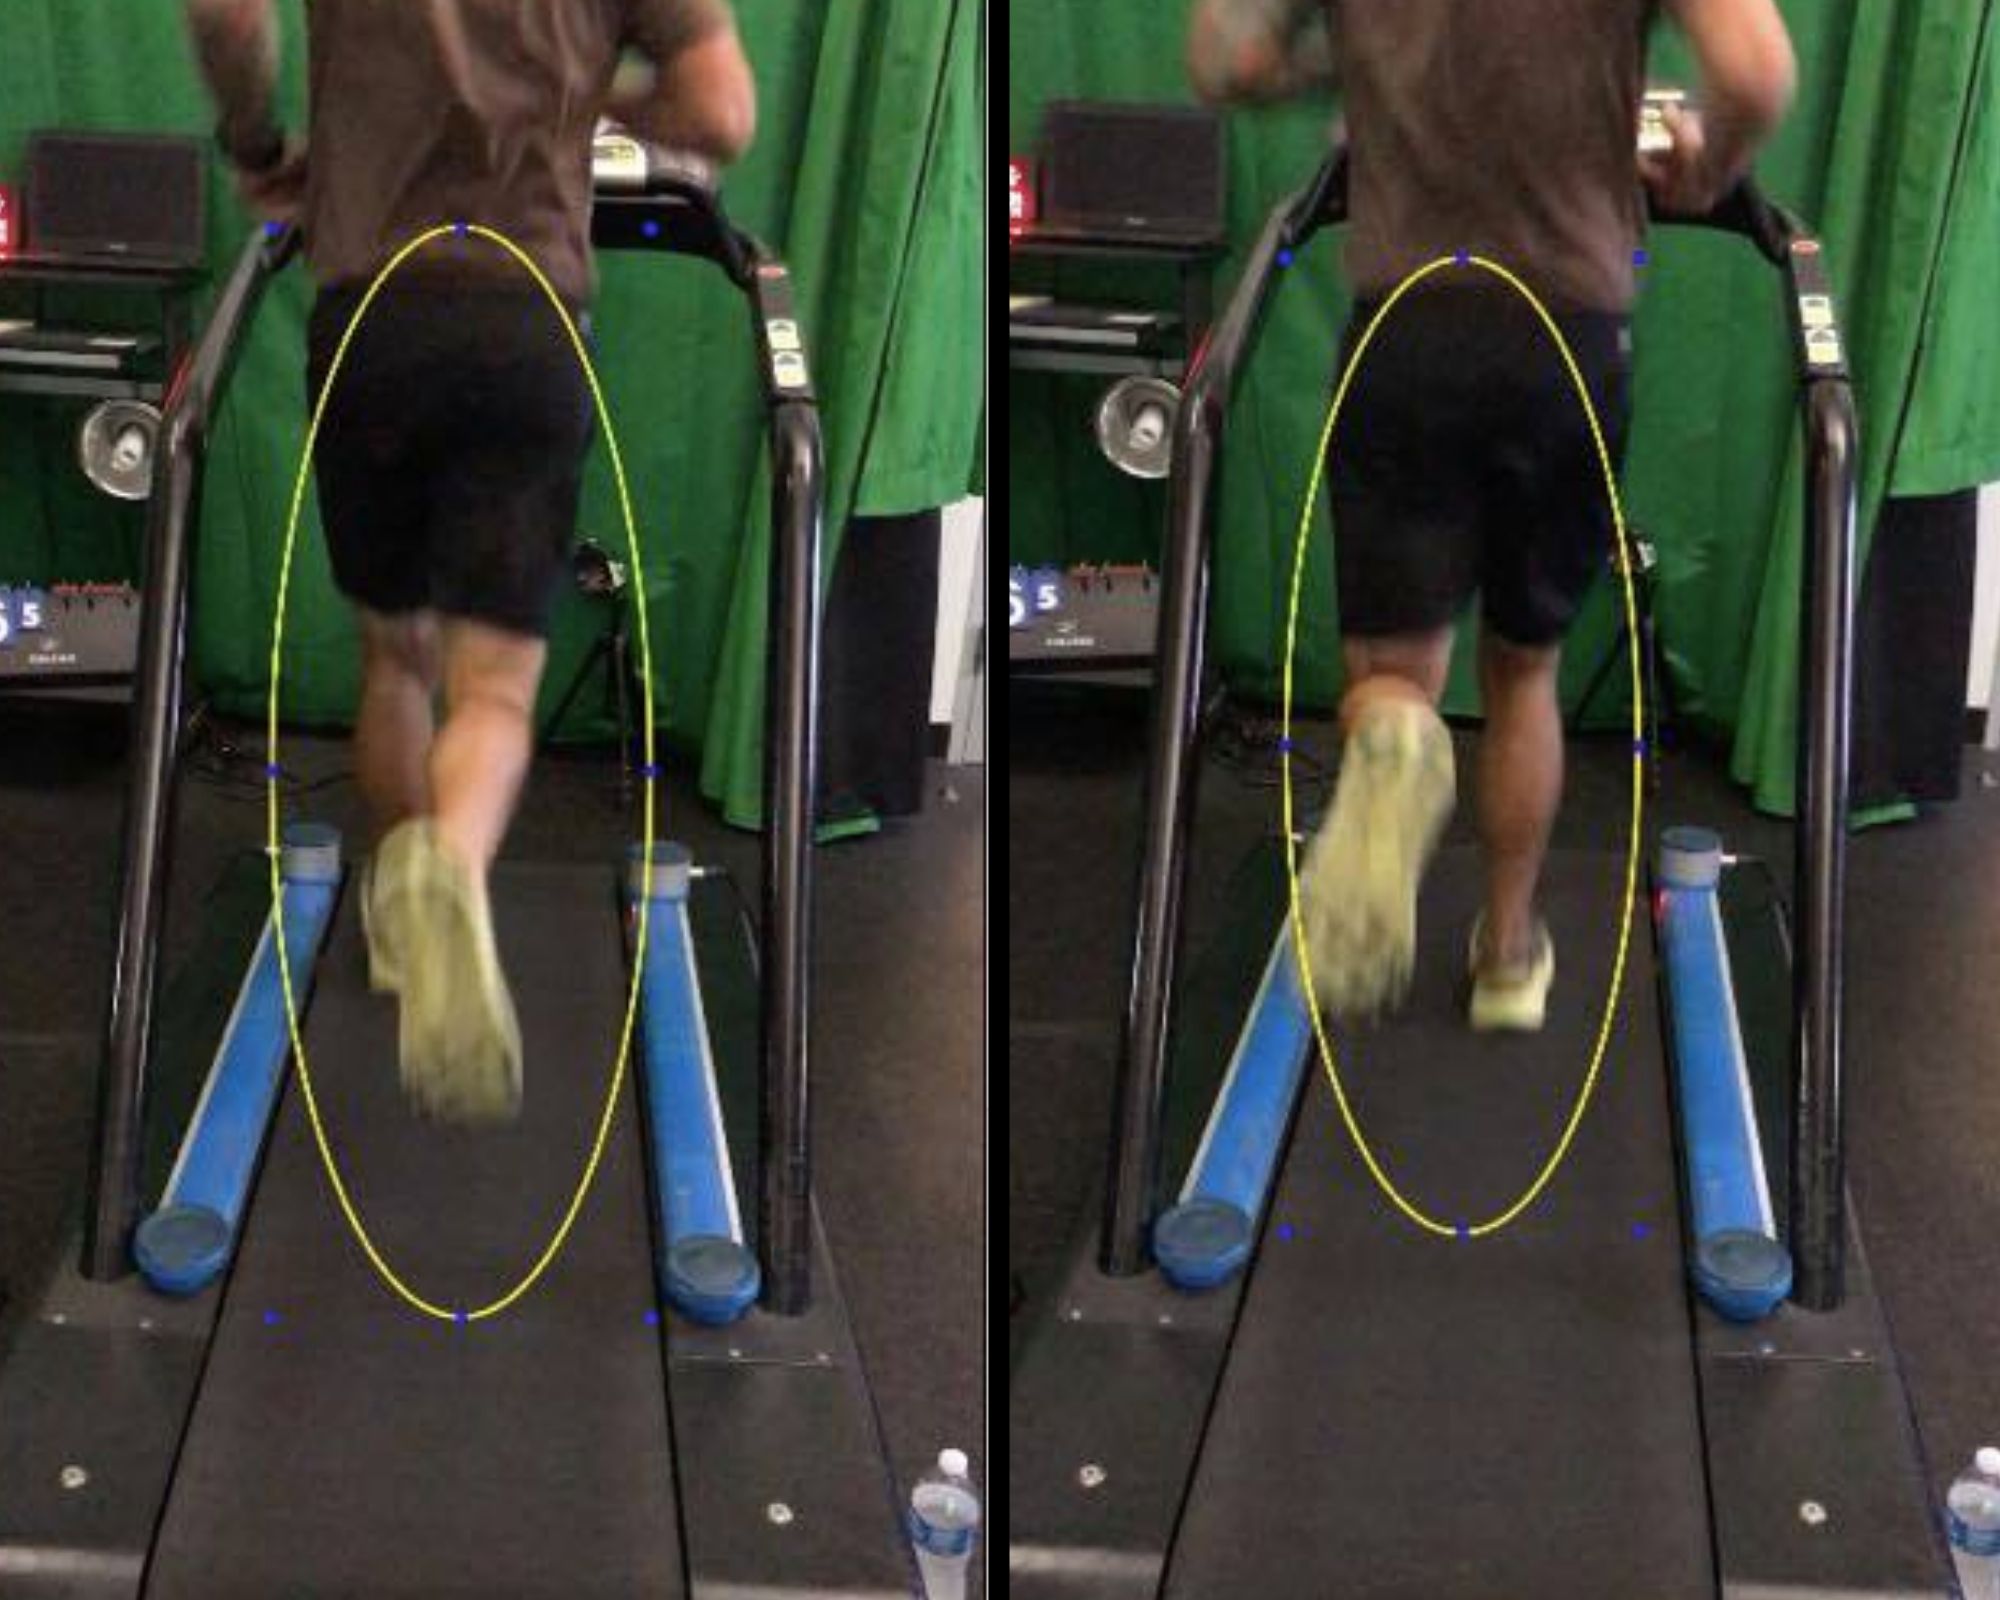 Identify asymmetries before they cause an injury in this runner from behind.